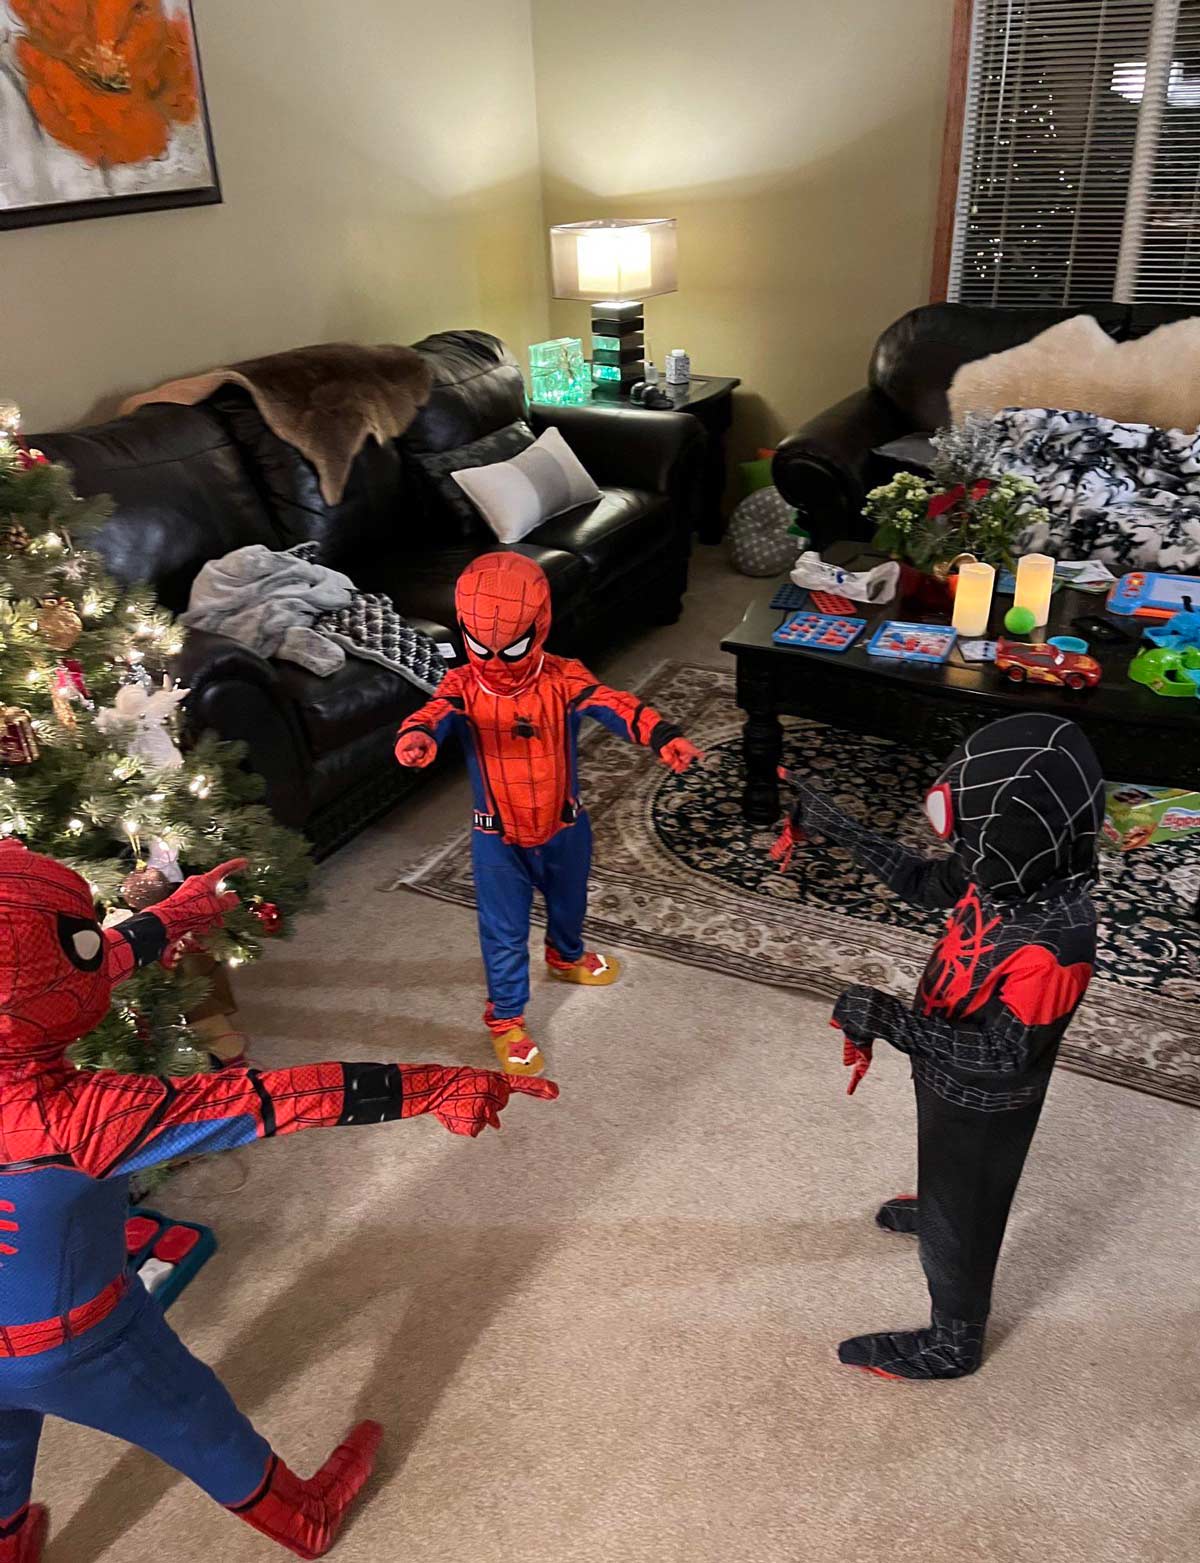 The kids wanted spiderman costumes... Did not disappoint